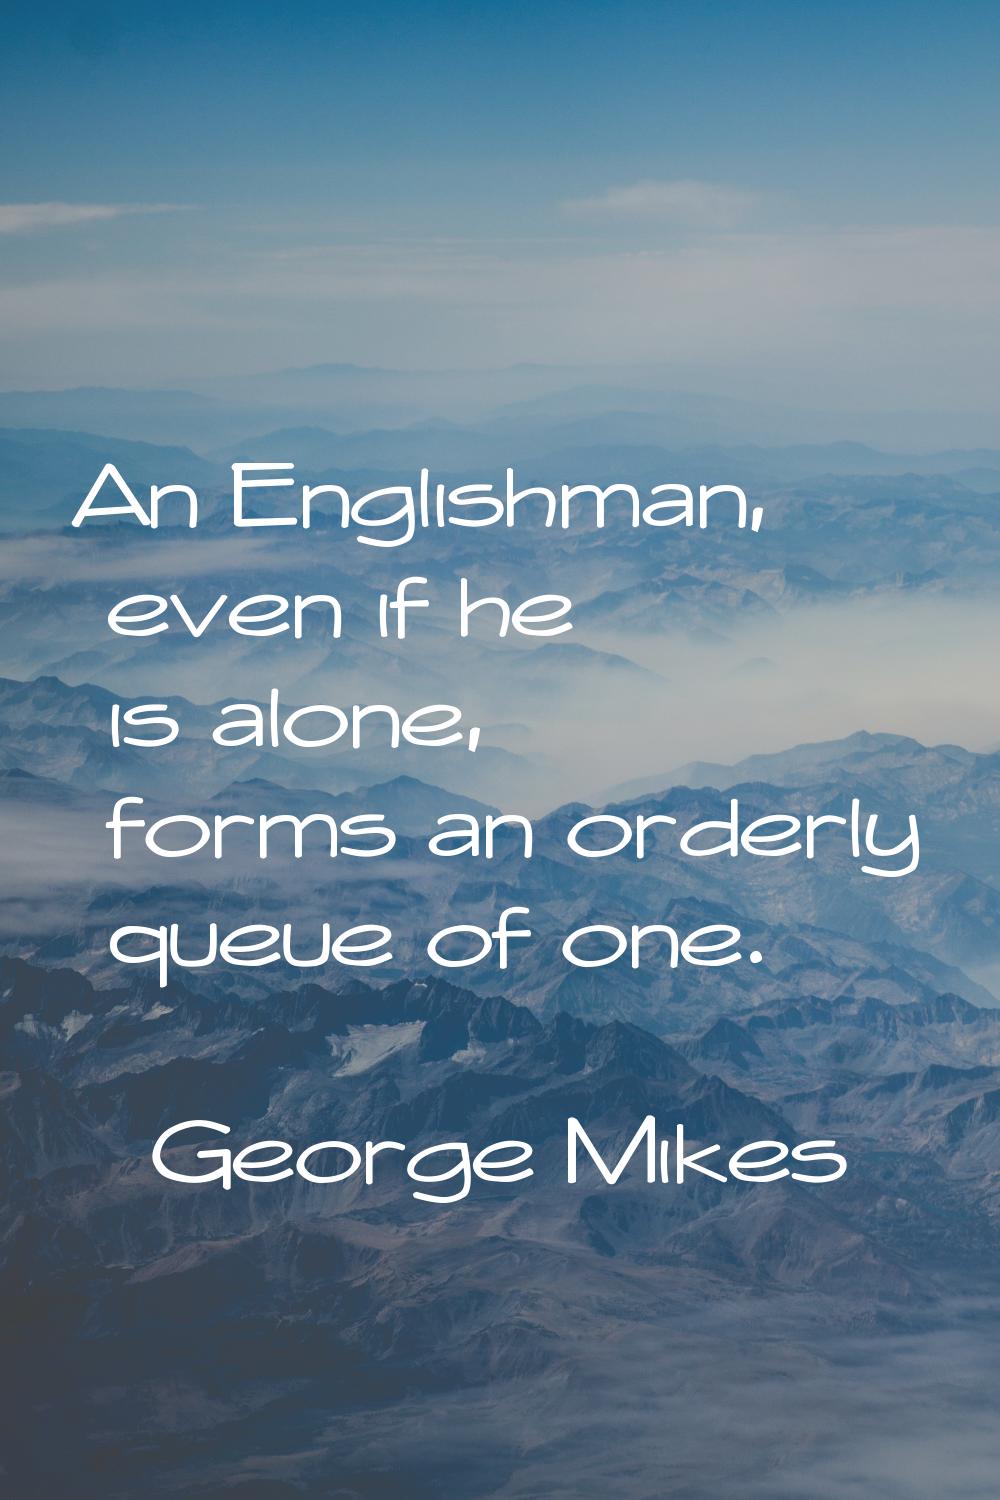 An Englishman, even if he is alone, forms an orderly queue of one.